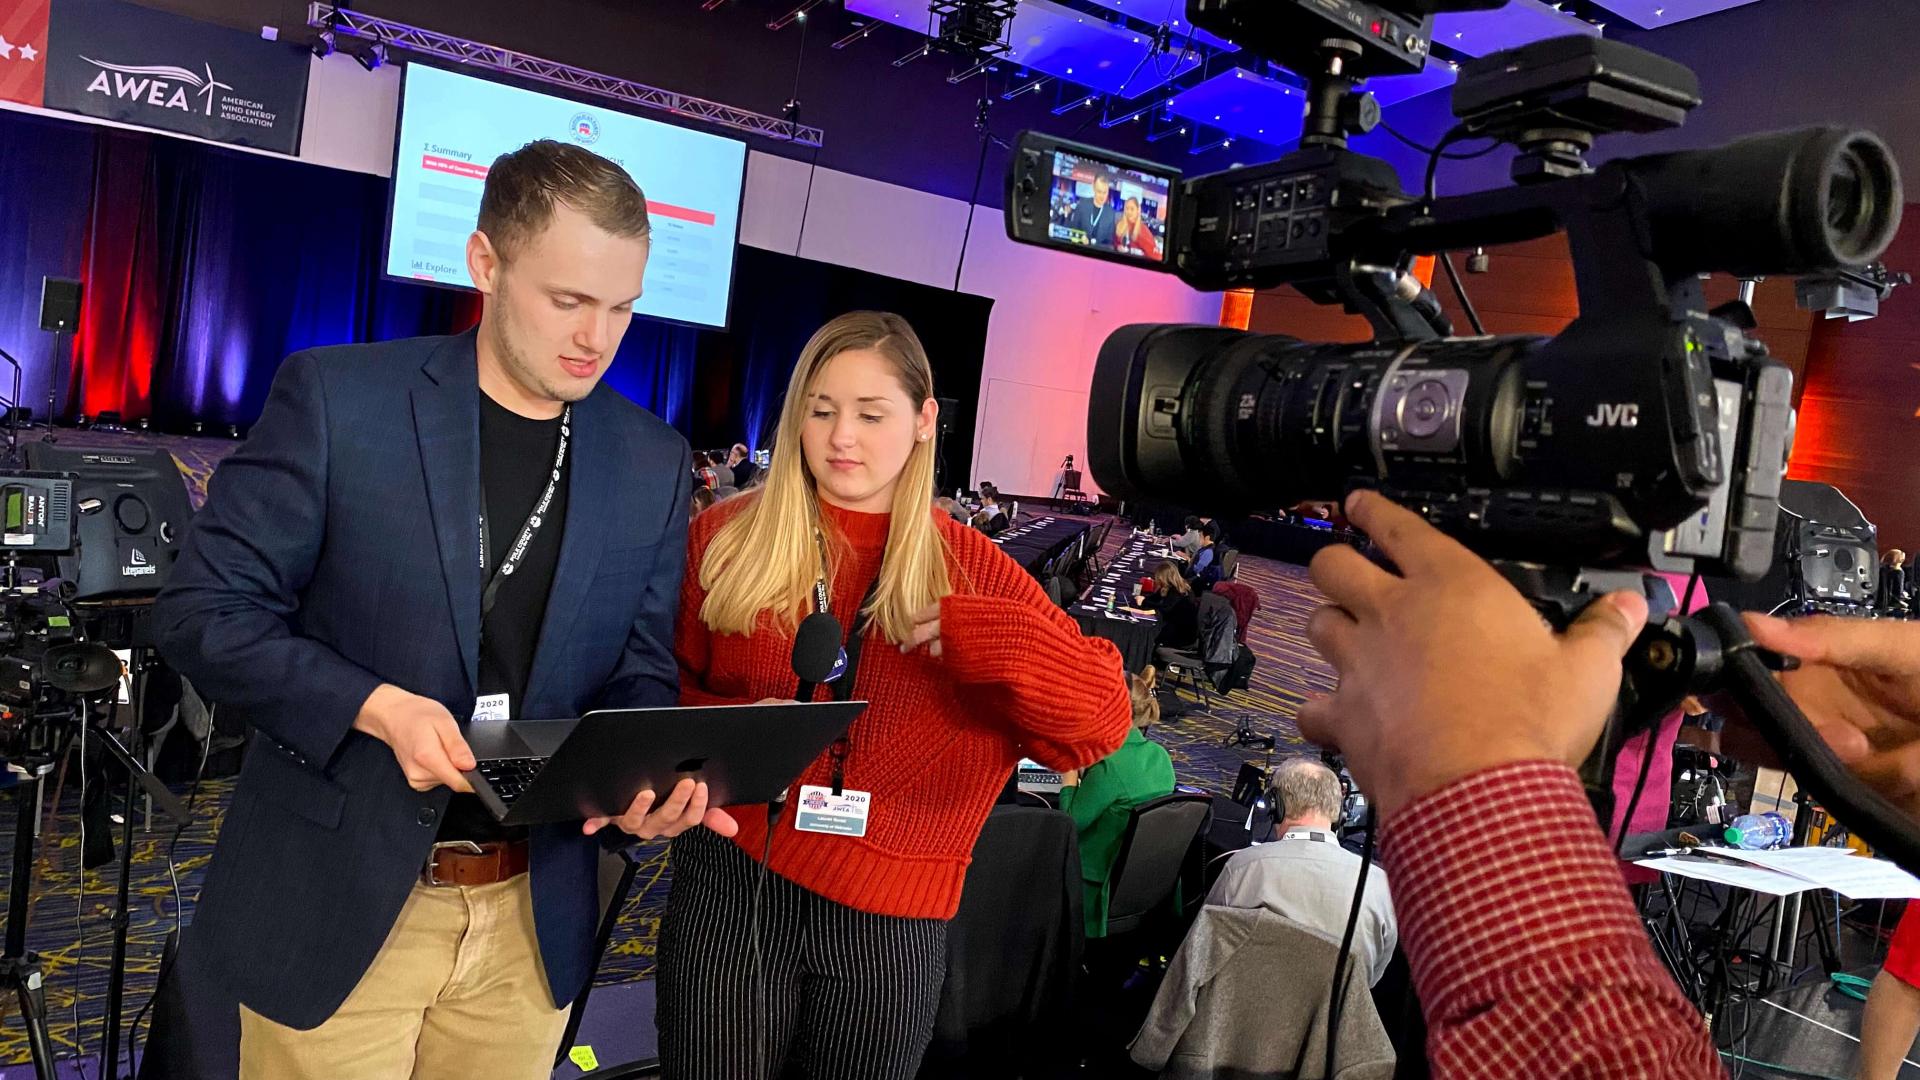 Students broadcast live from a local event